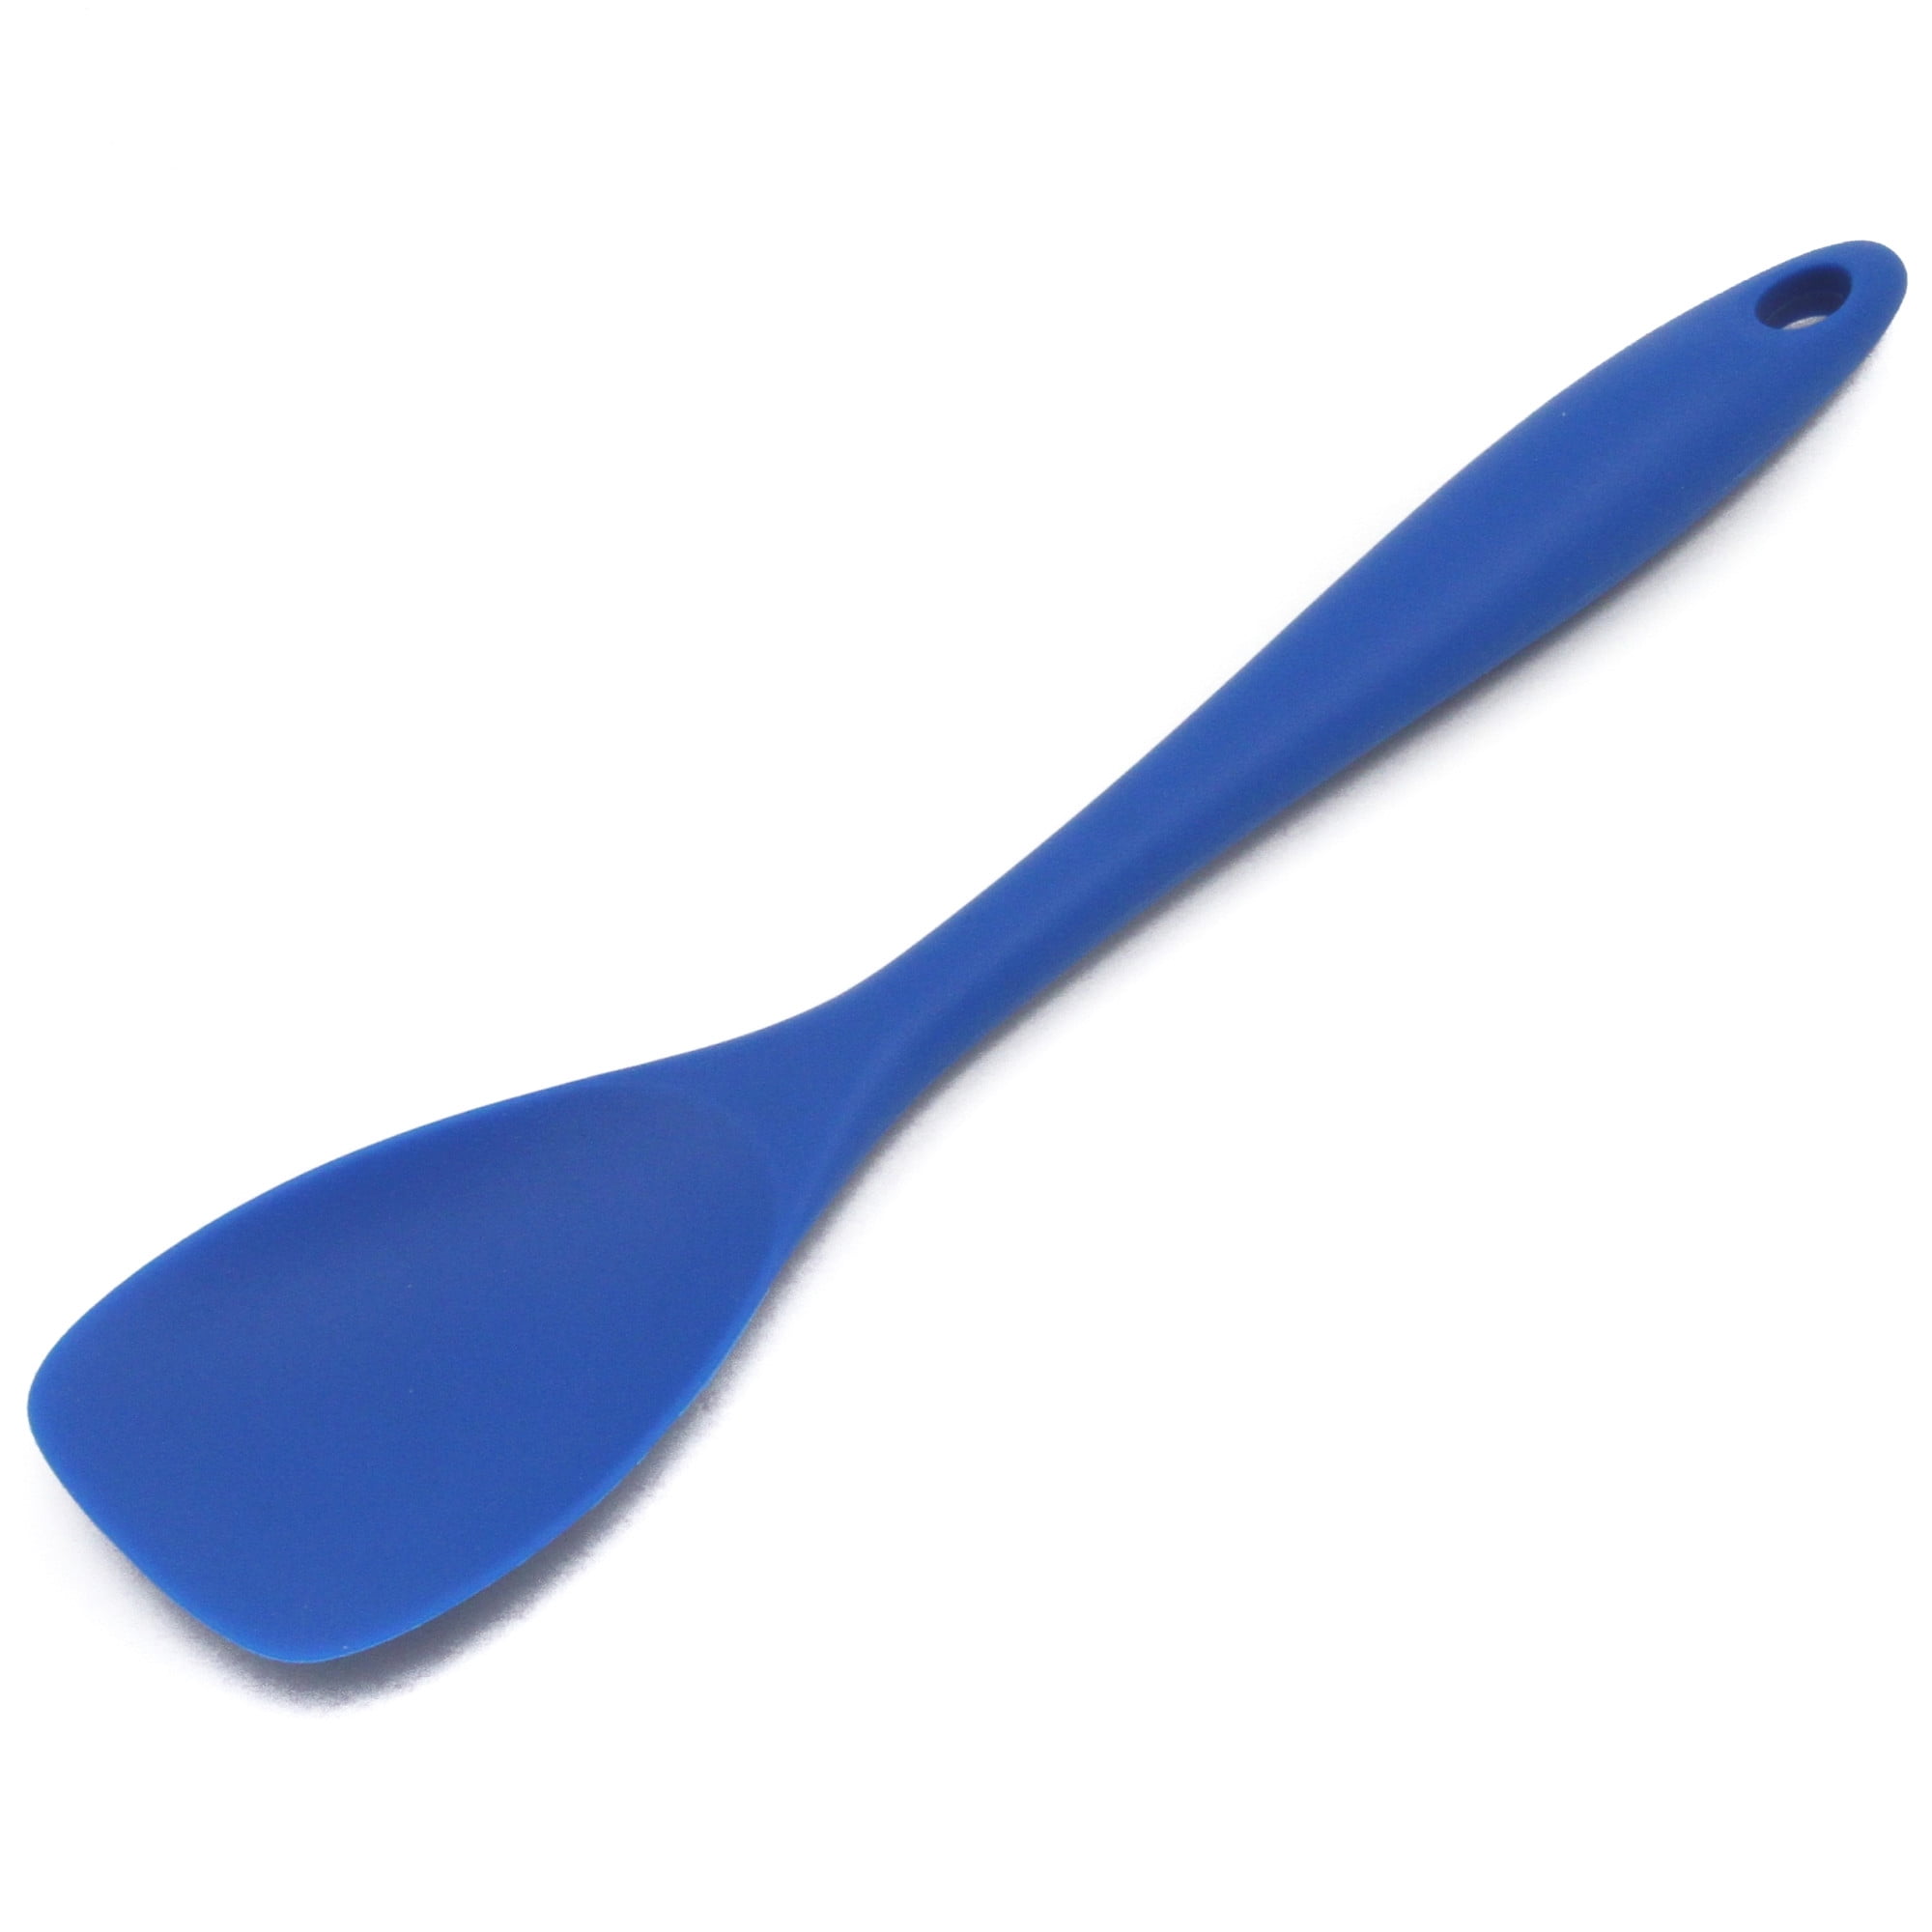 Thinsont Trend Silicone Spatula Bowl Scraper Cooking Baking Cake Mixing Silicone Blue, Size: 27